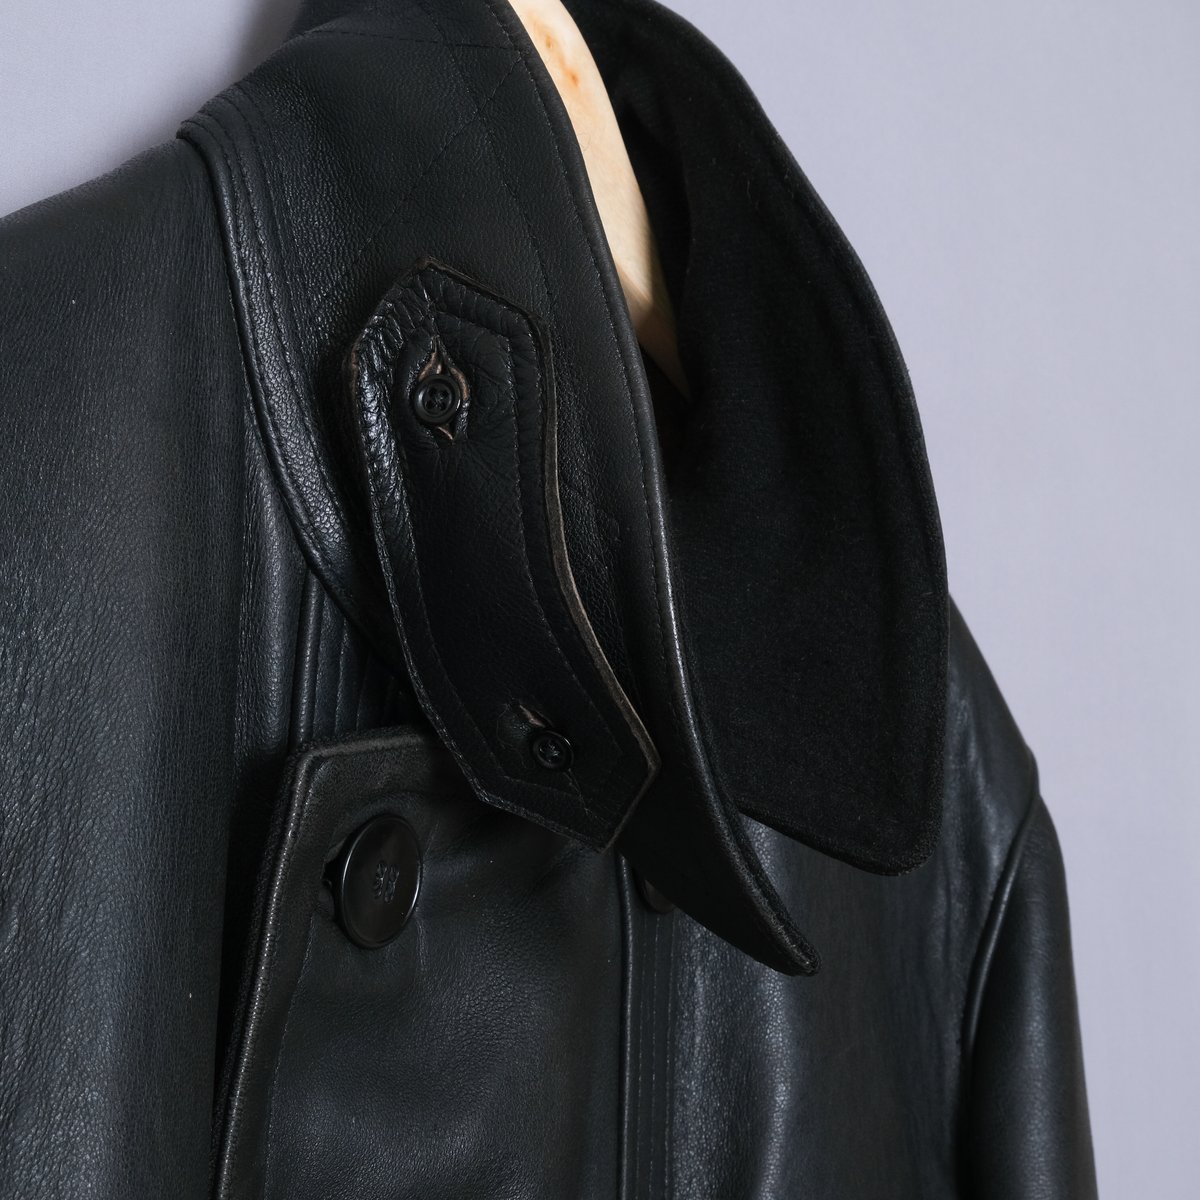 40s-50s French Vintage Leather Jacket (Corbusier Jacket)